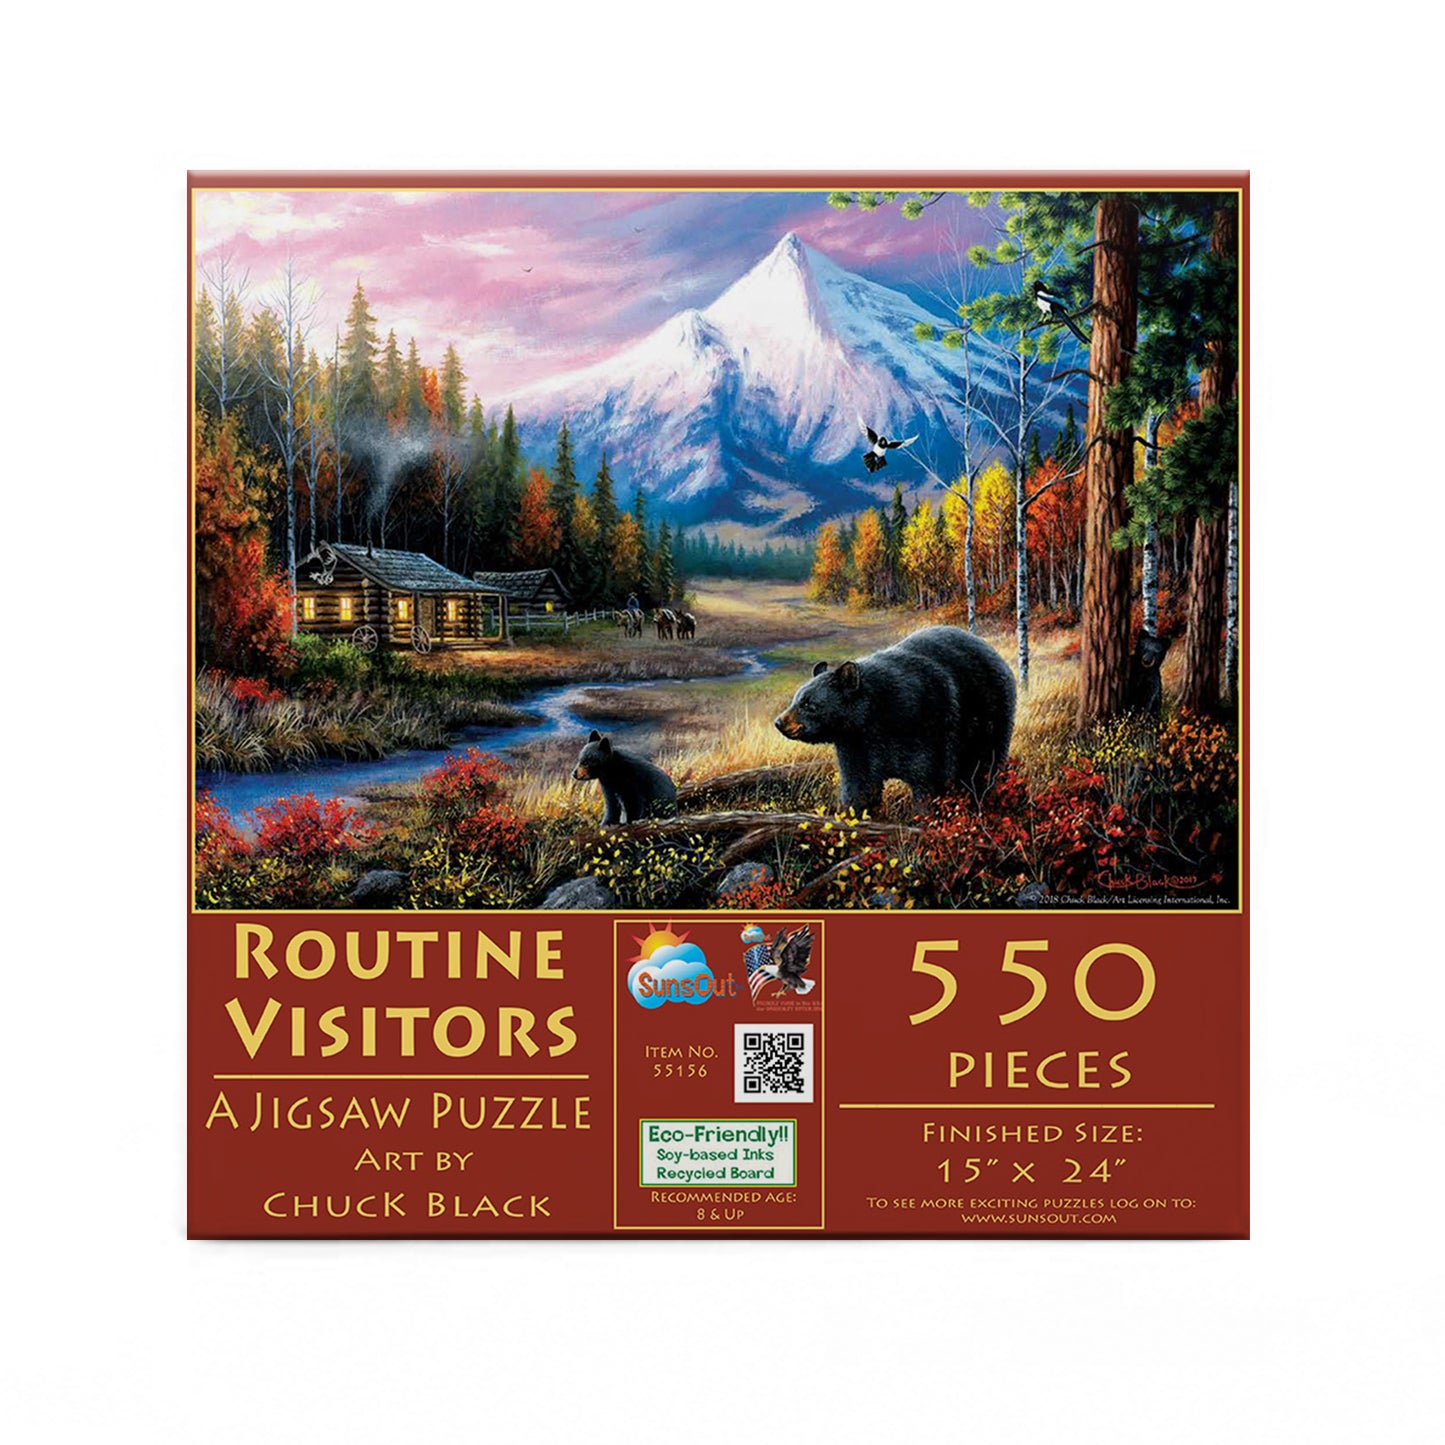 Routine Visitors - 550 Piece Jigsaw Puzzle